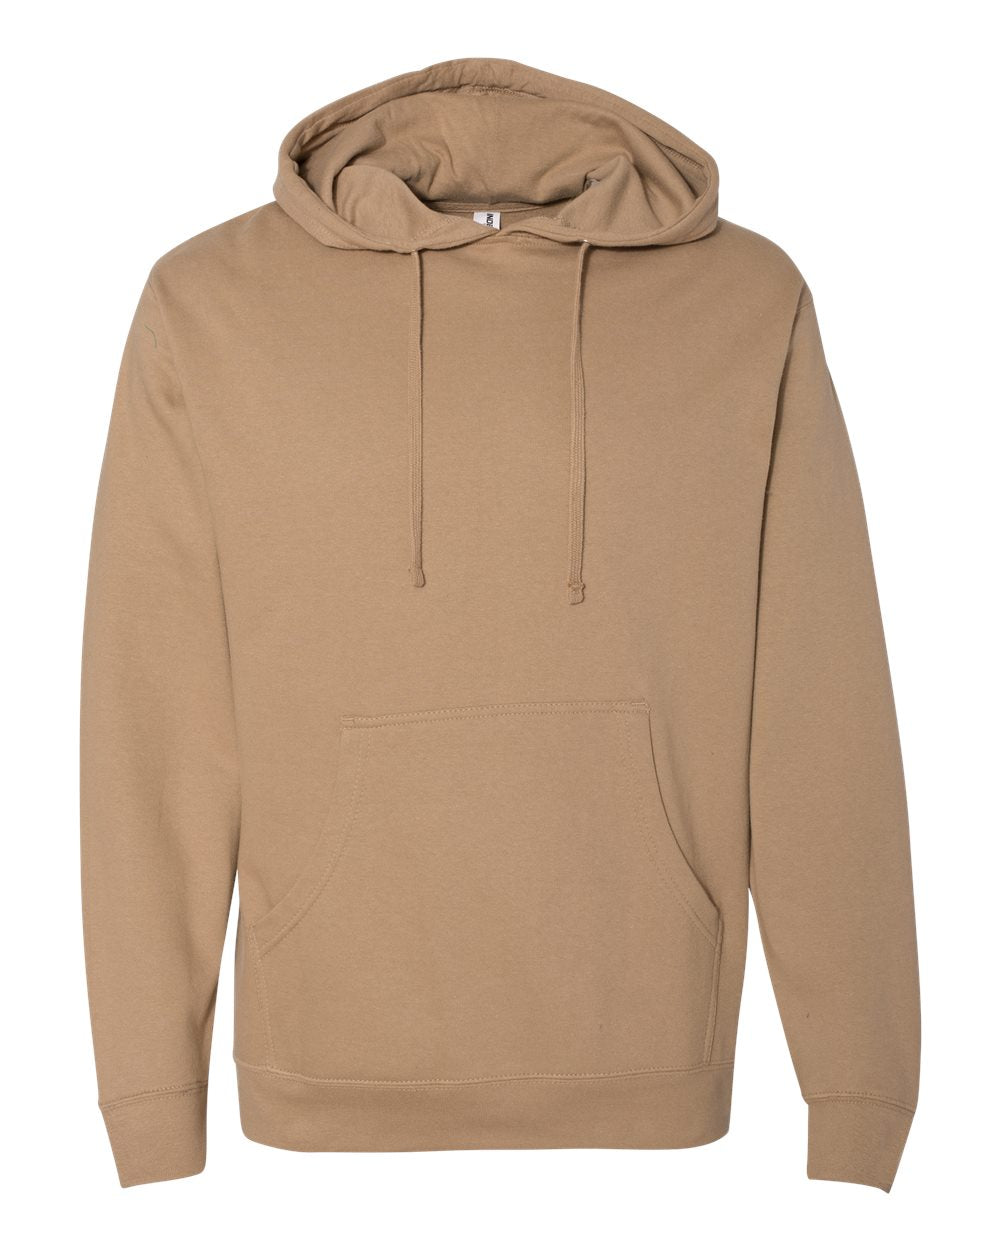 Independent Trading Co. Midweight Sweatshirt 2 (SS4500)